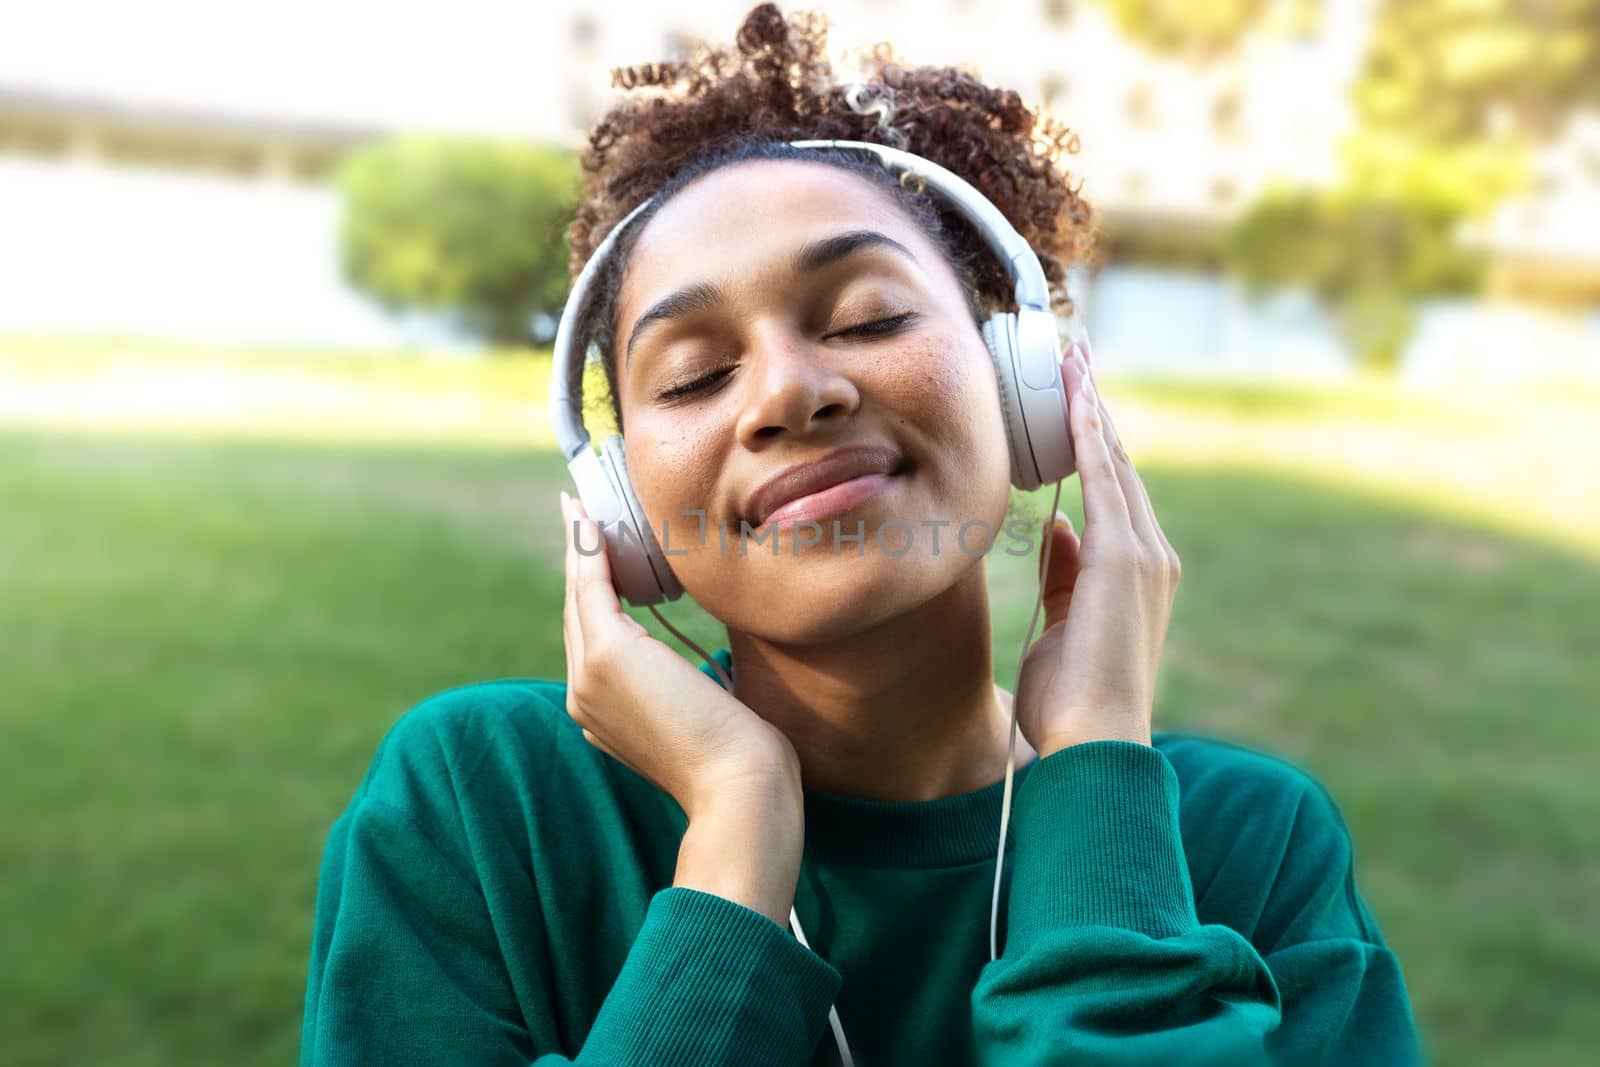 African American young woman with closed eyes relaxing outdoors listening to music using headphones. Lifestyle concept.